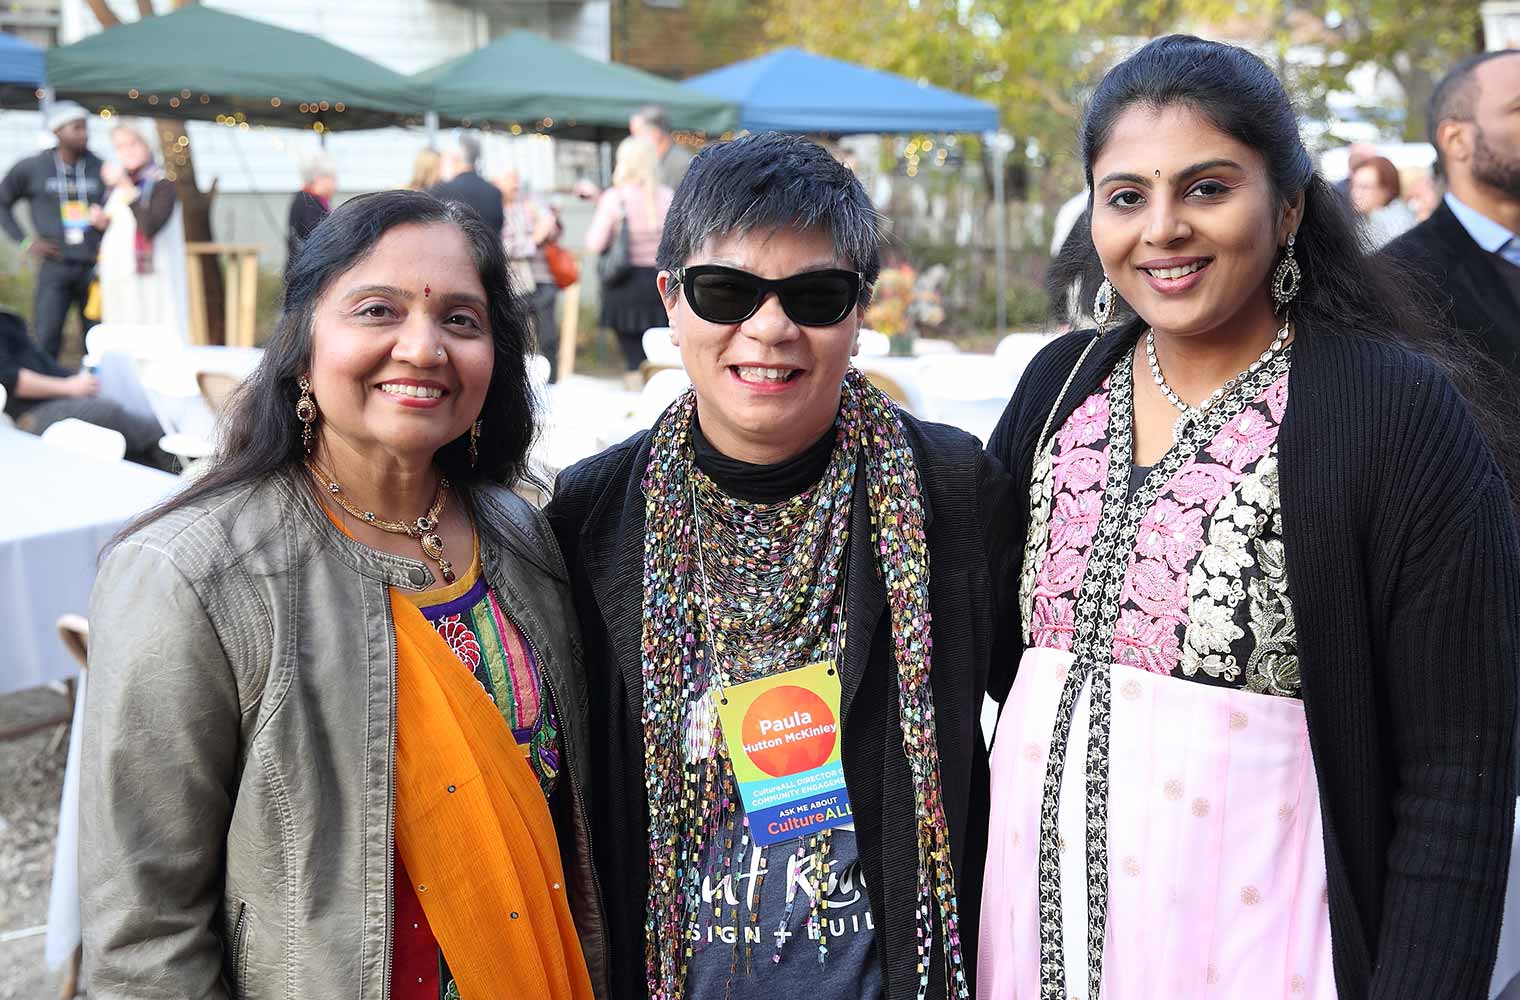 CultureALL Ambassadors Sonal Mistry (left) and Pragnya Yogesh (right) pose with CultureALL Community Engagement Director Paula Hutton McKinley (middle) at Silent Rivers 25th anniversary and dsm Unveiling